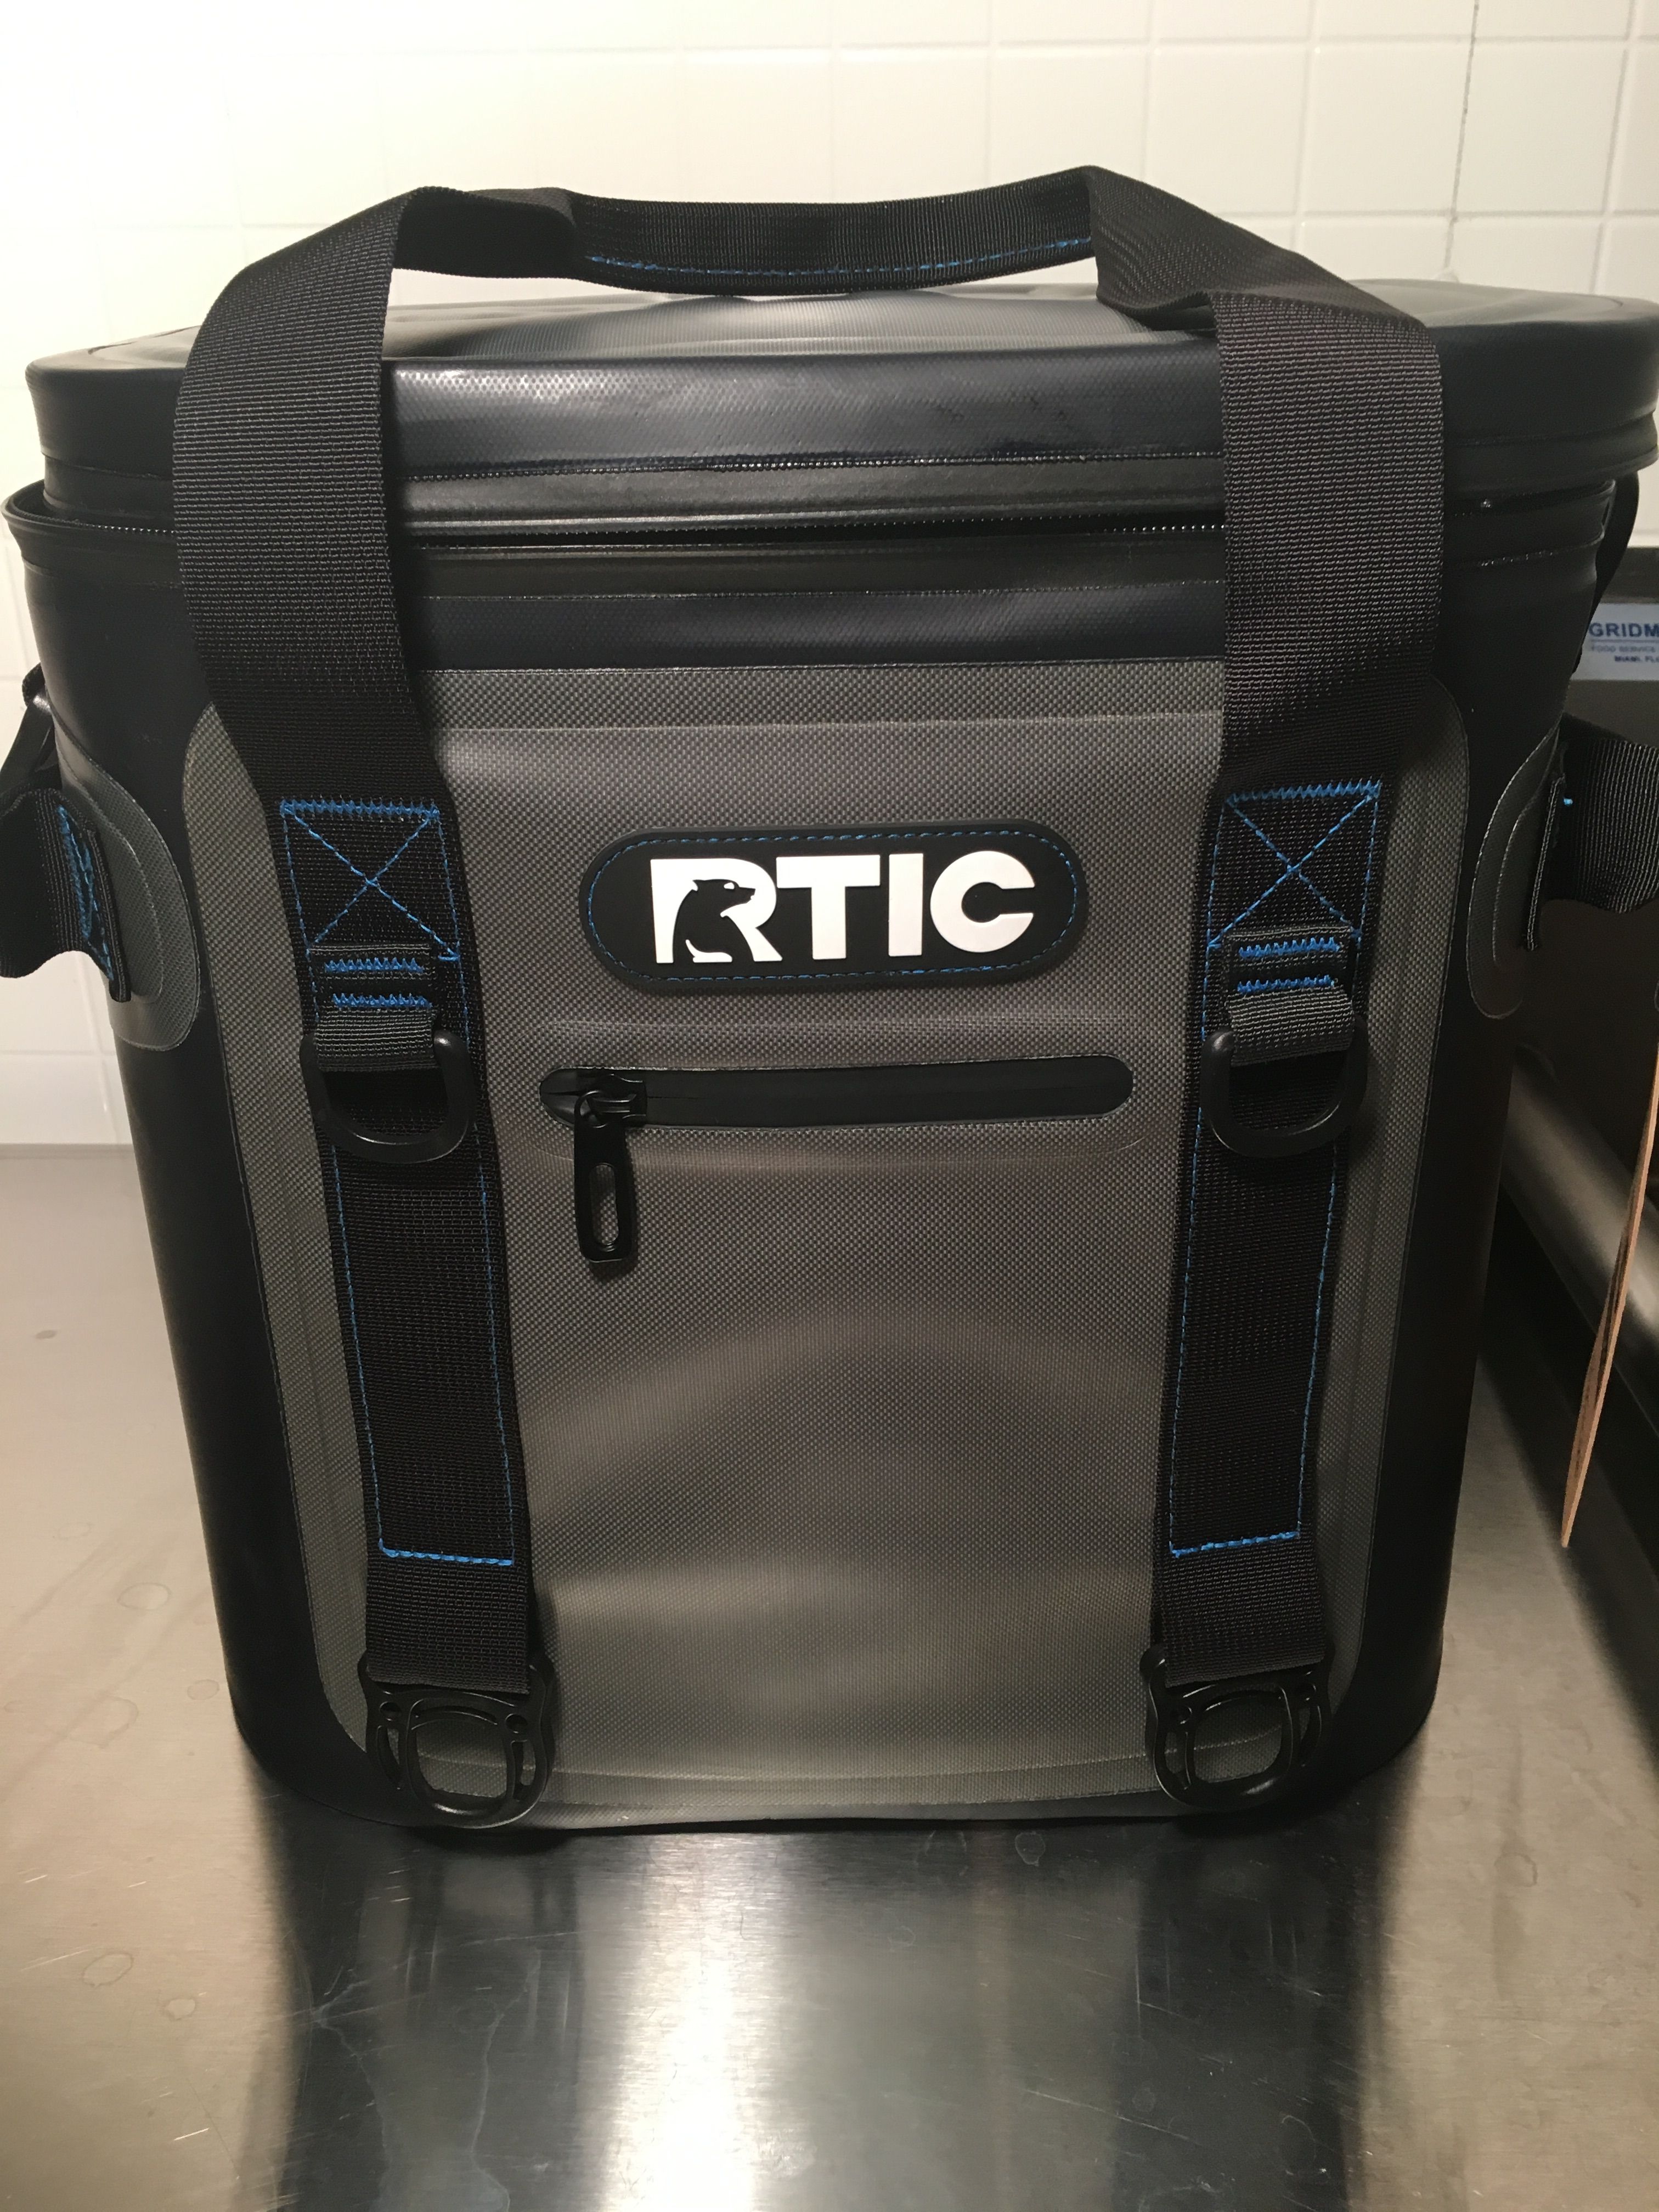 Hands On Review: RTIC Soft Pack Coolers